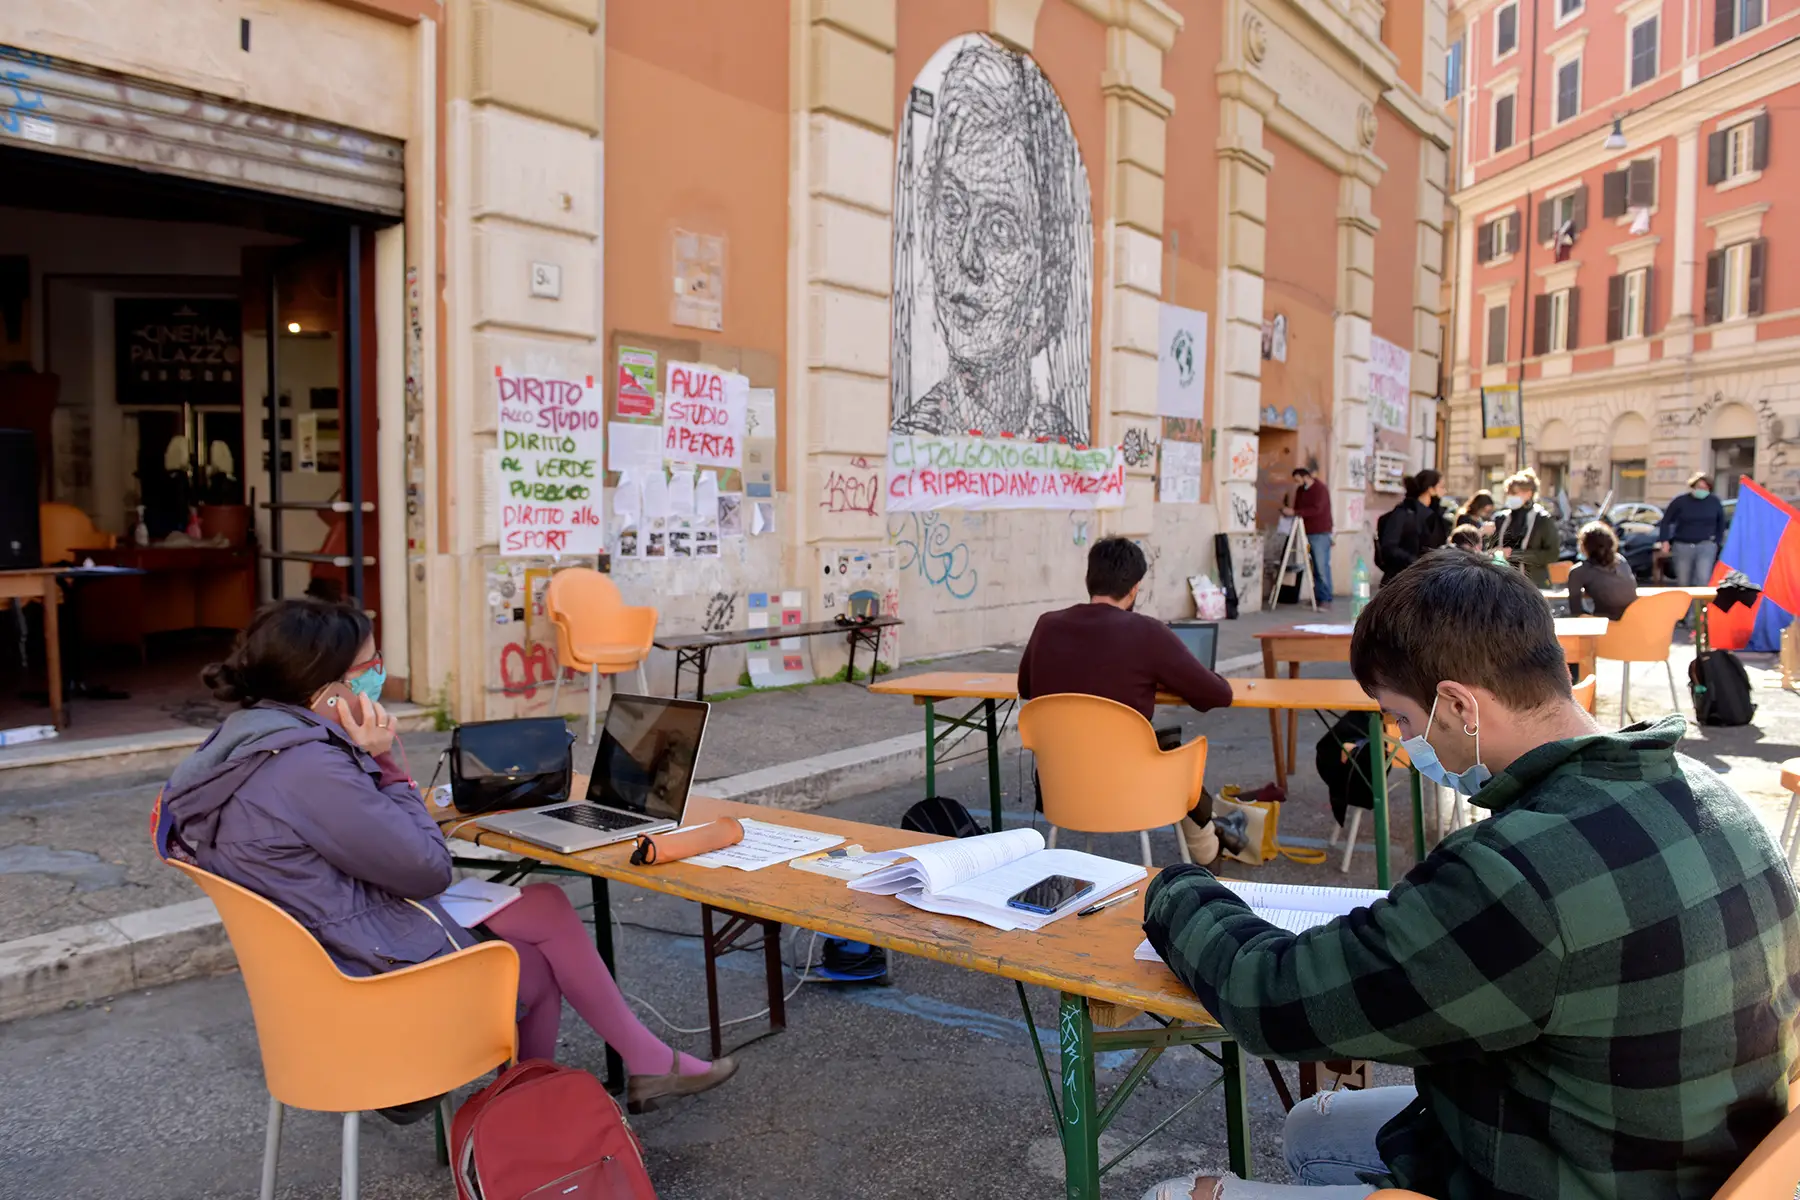 University students in Rome studying outside